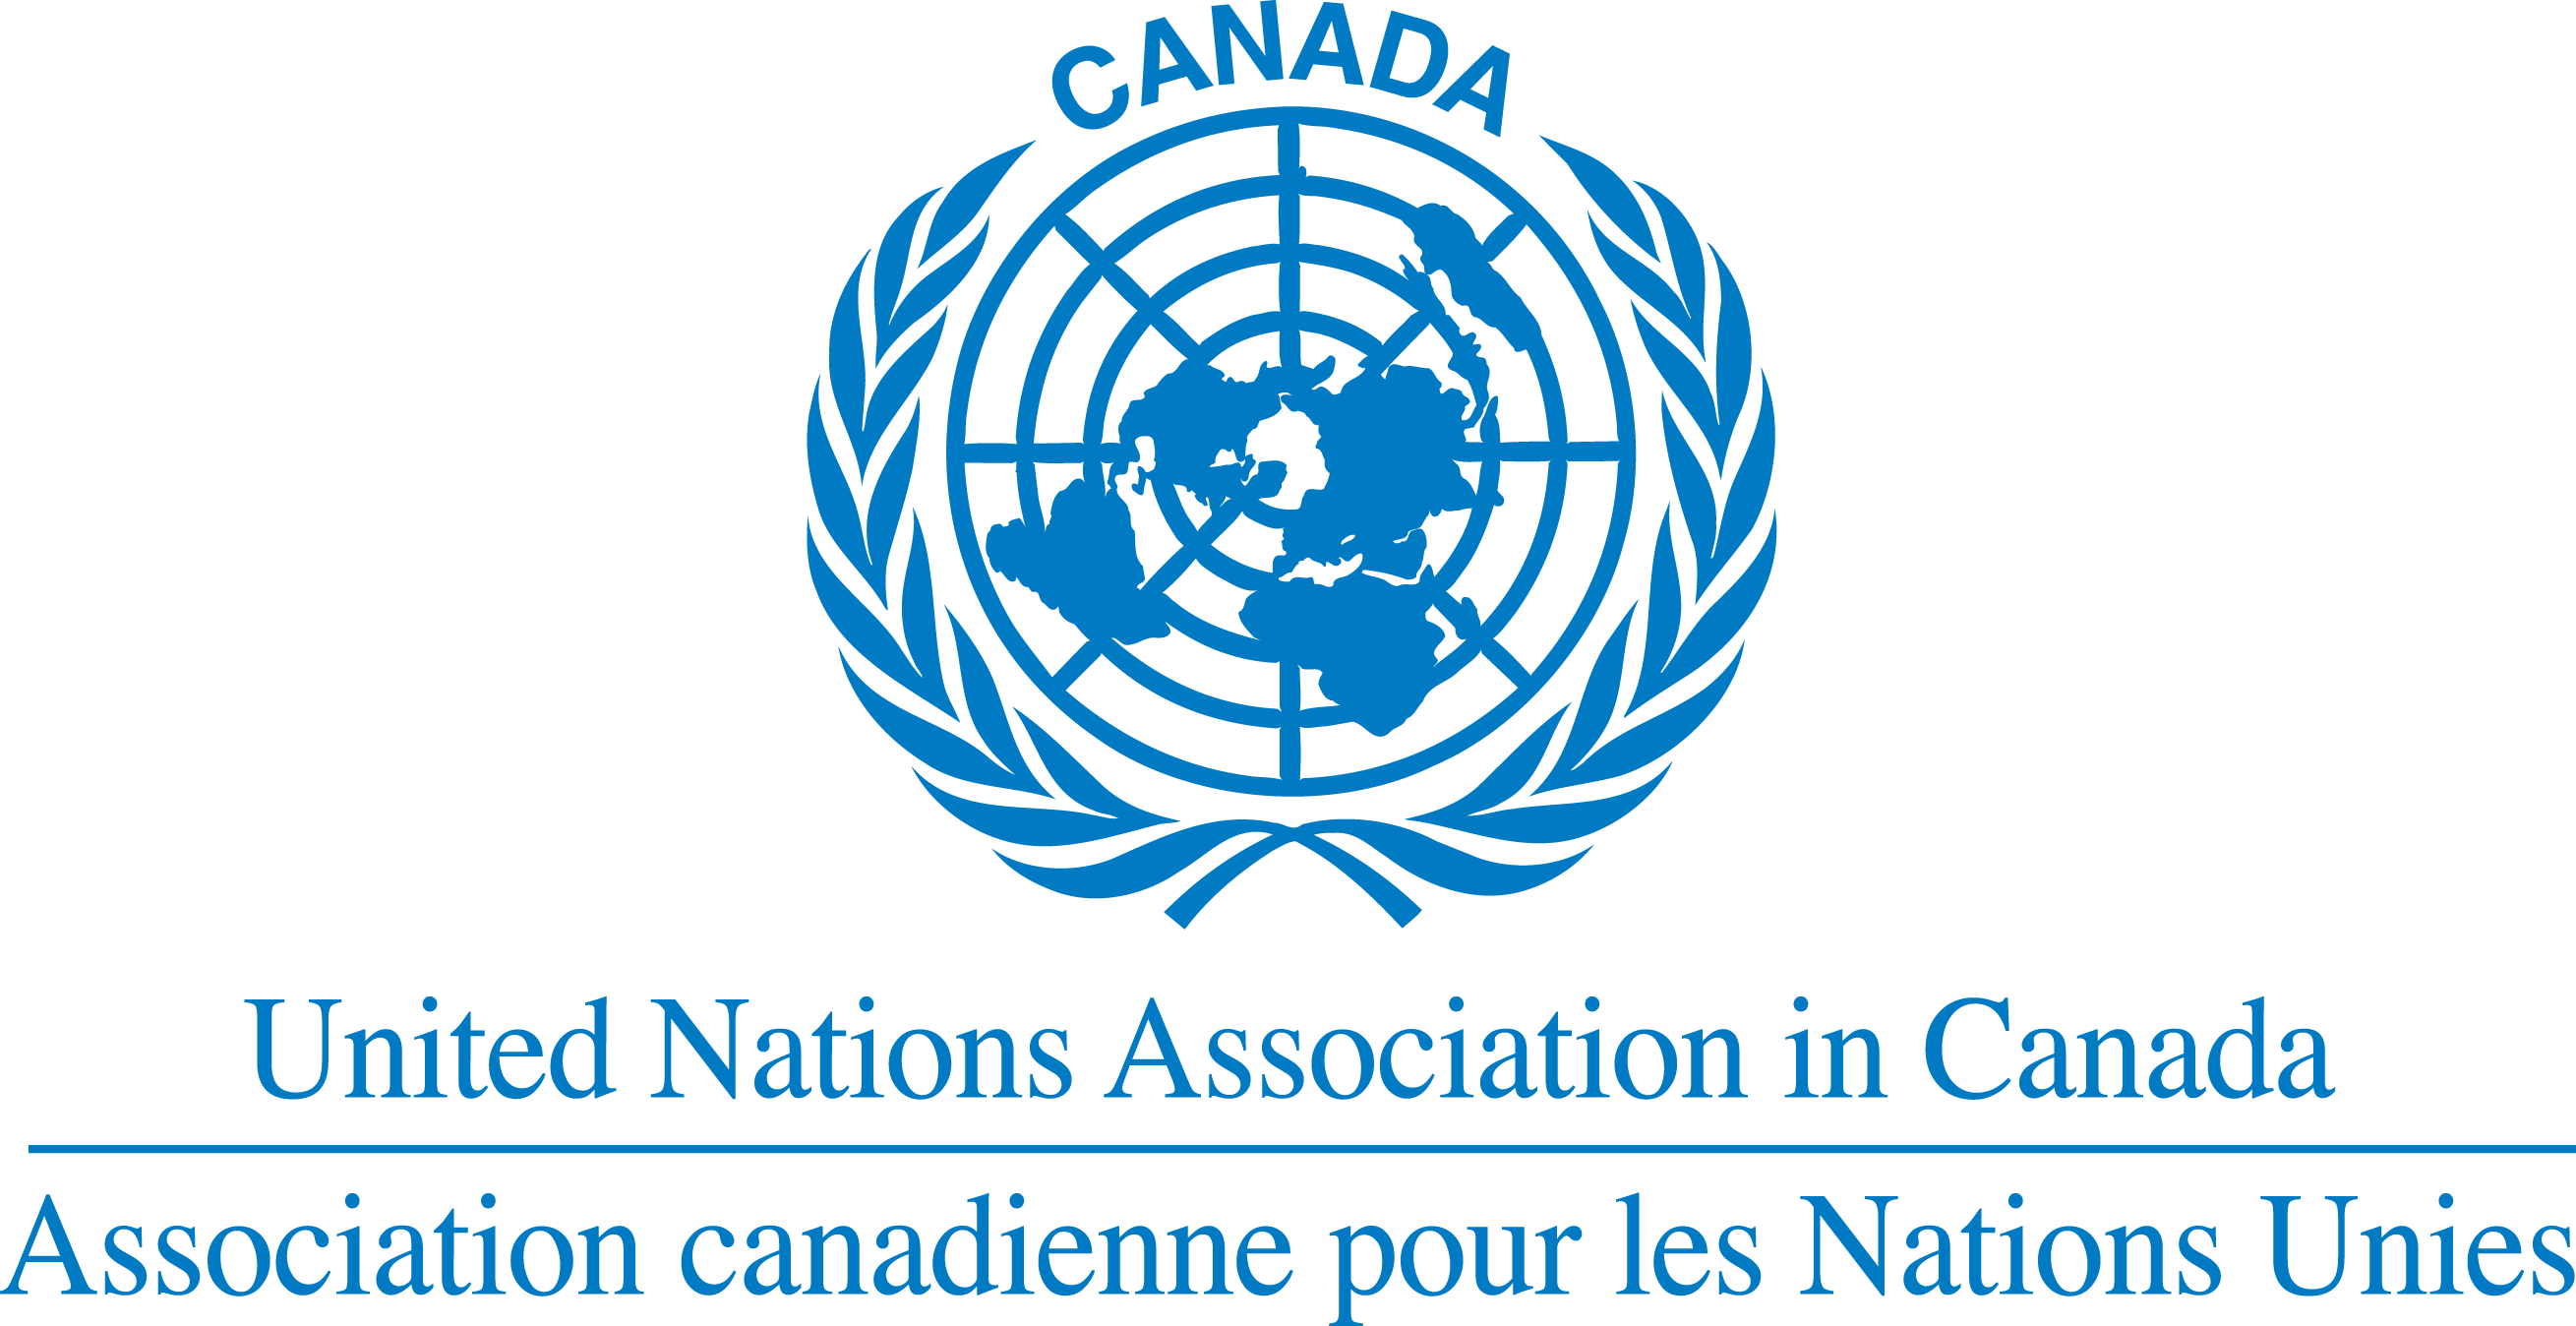 The United Nations Association in Canada